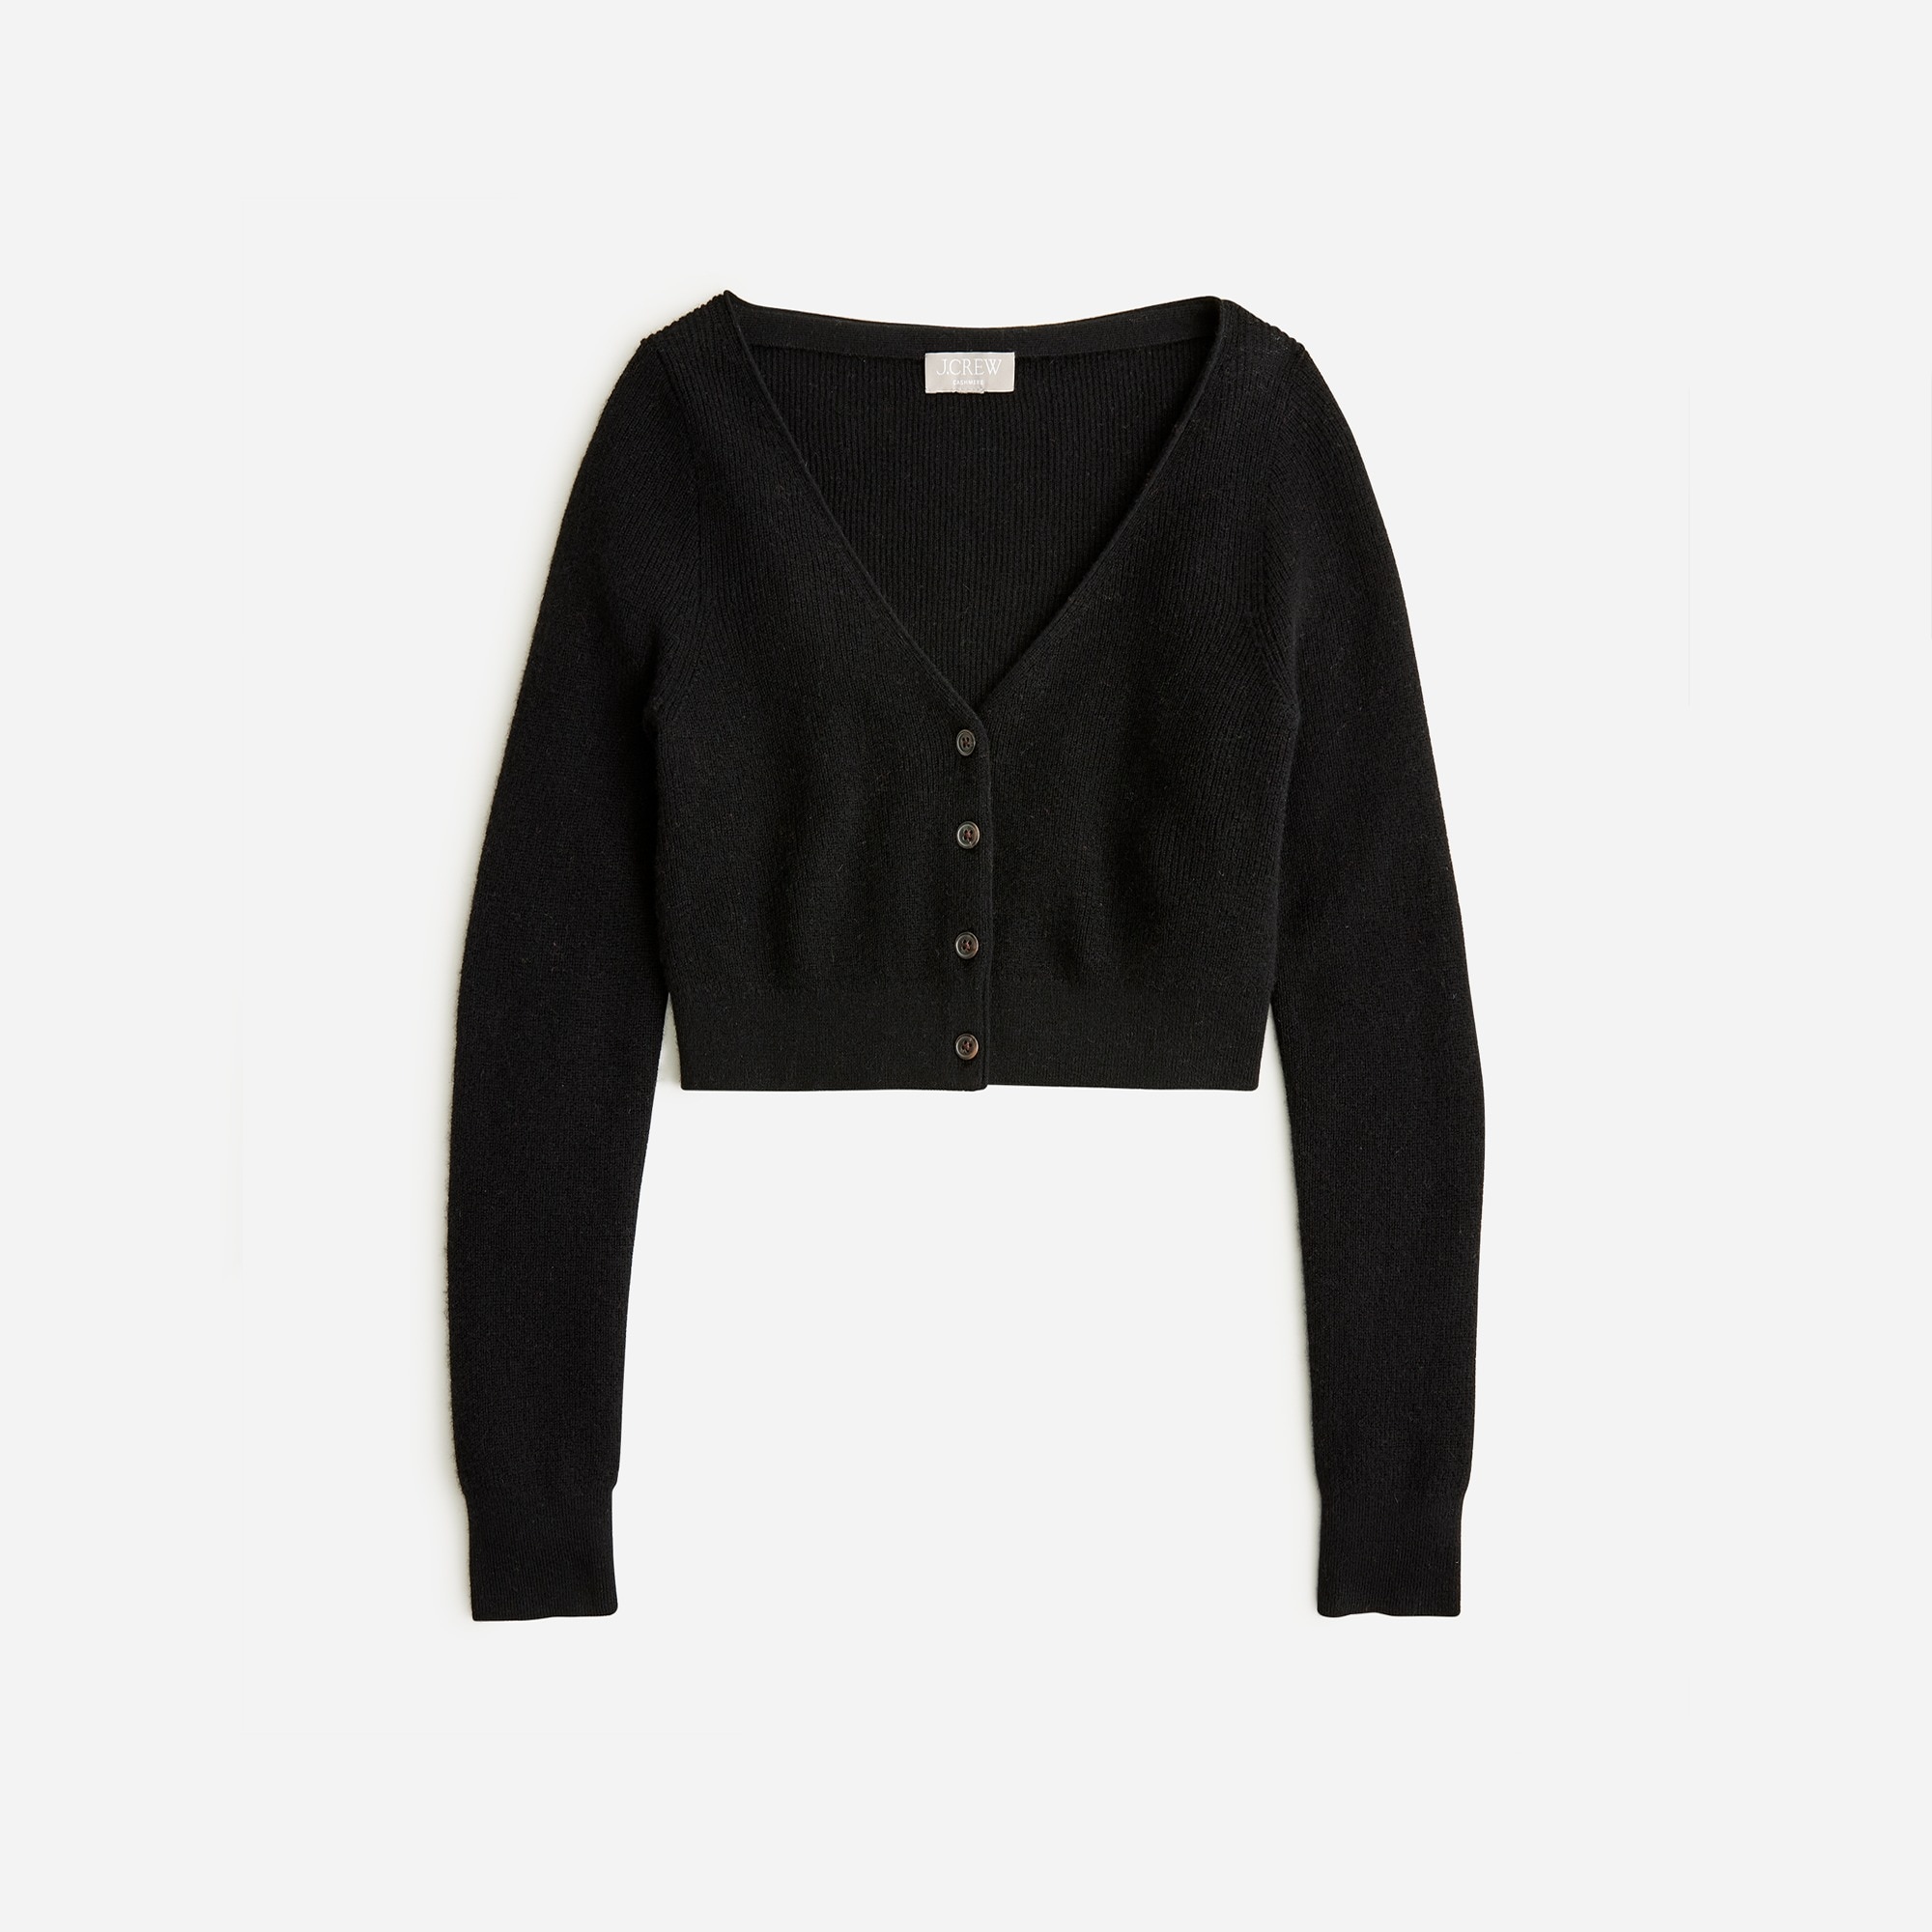  Featherweight cashmere cropped cardigan sweater